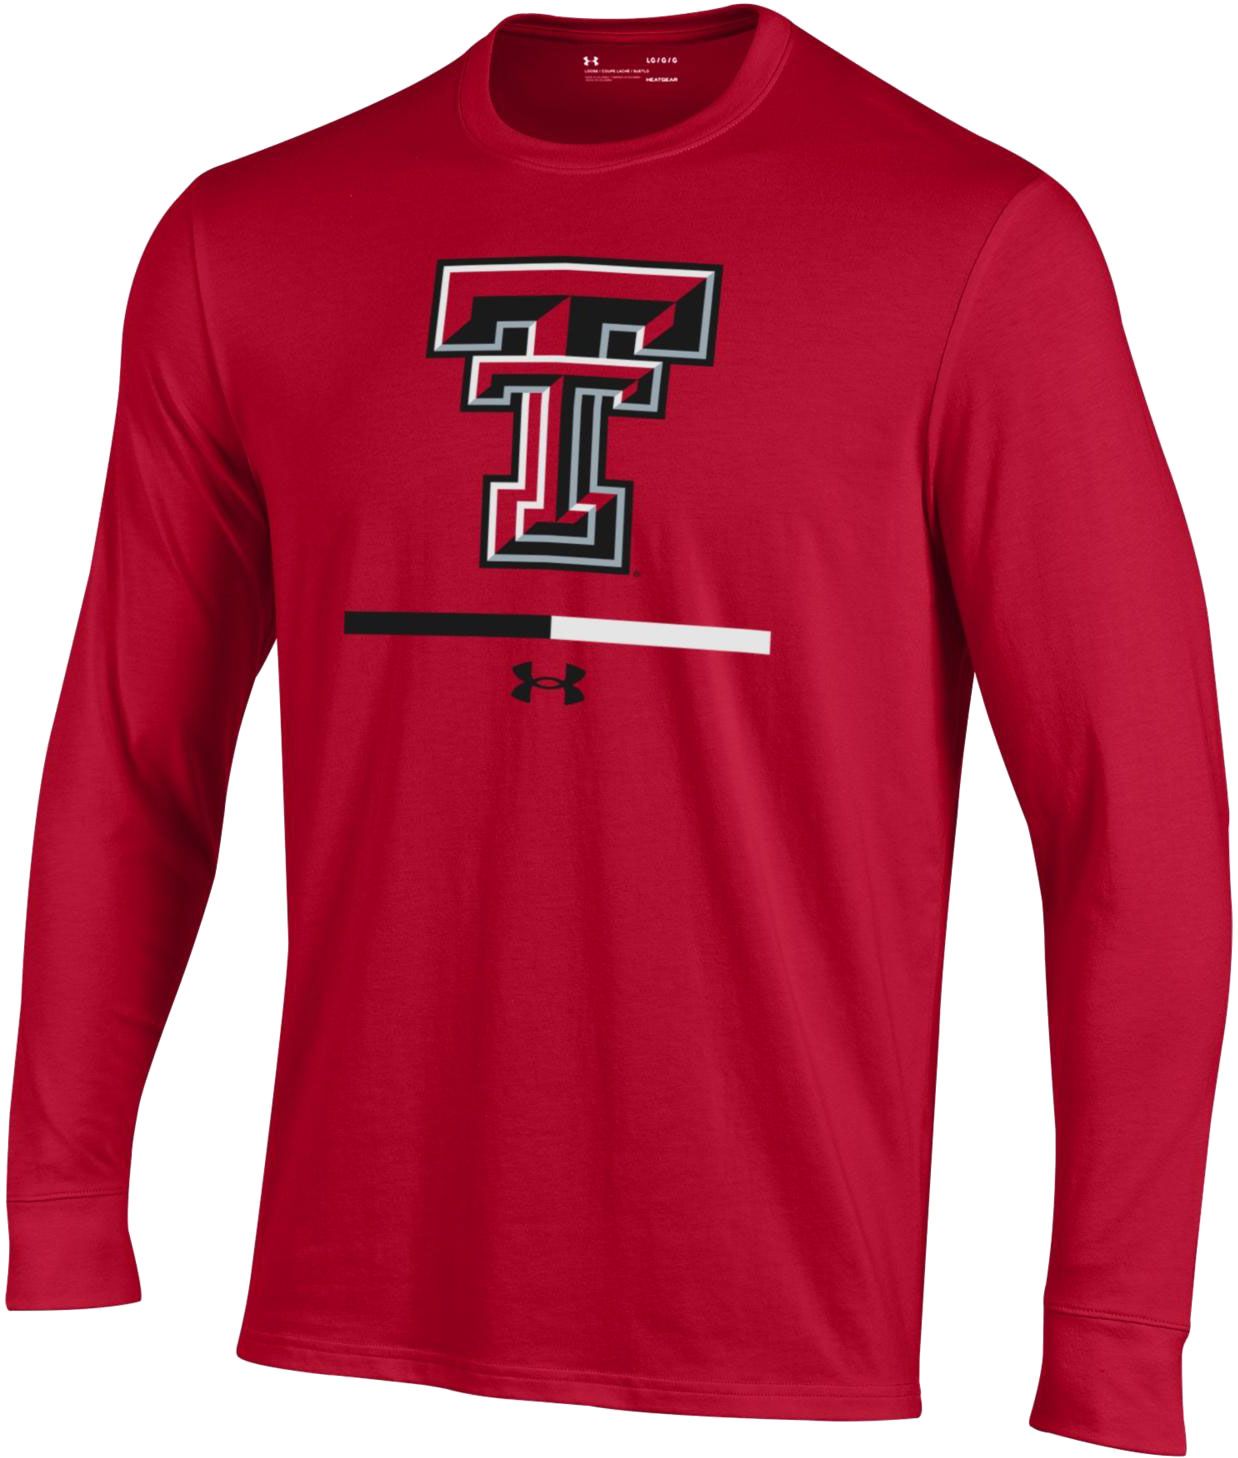 red under armour t shirt